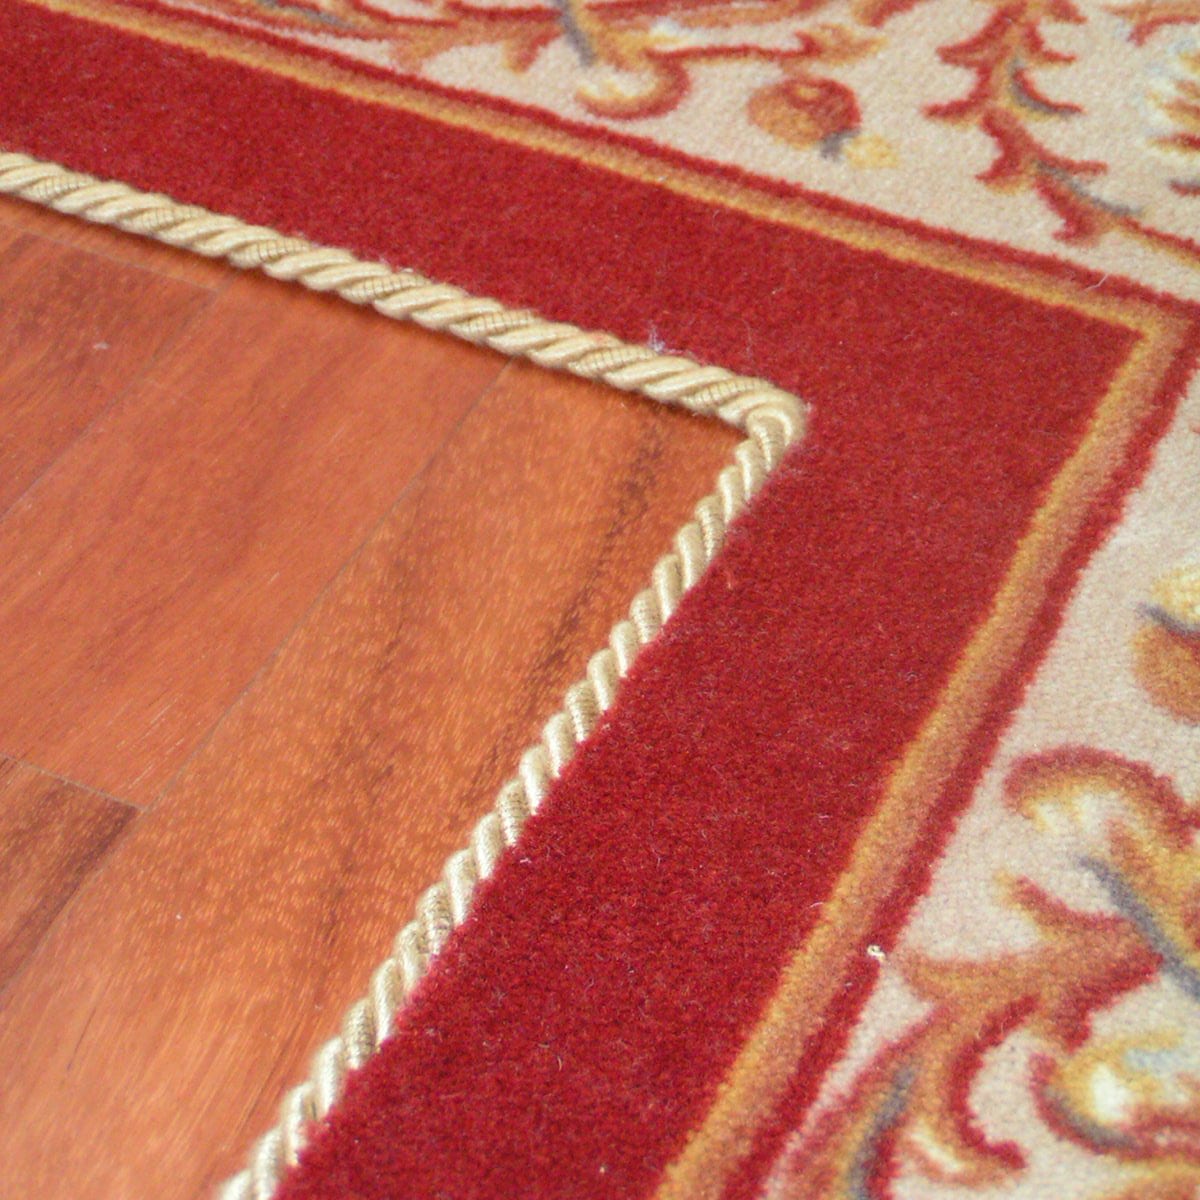 Easybind finishes edges of rugs & runners securely